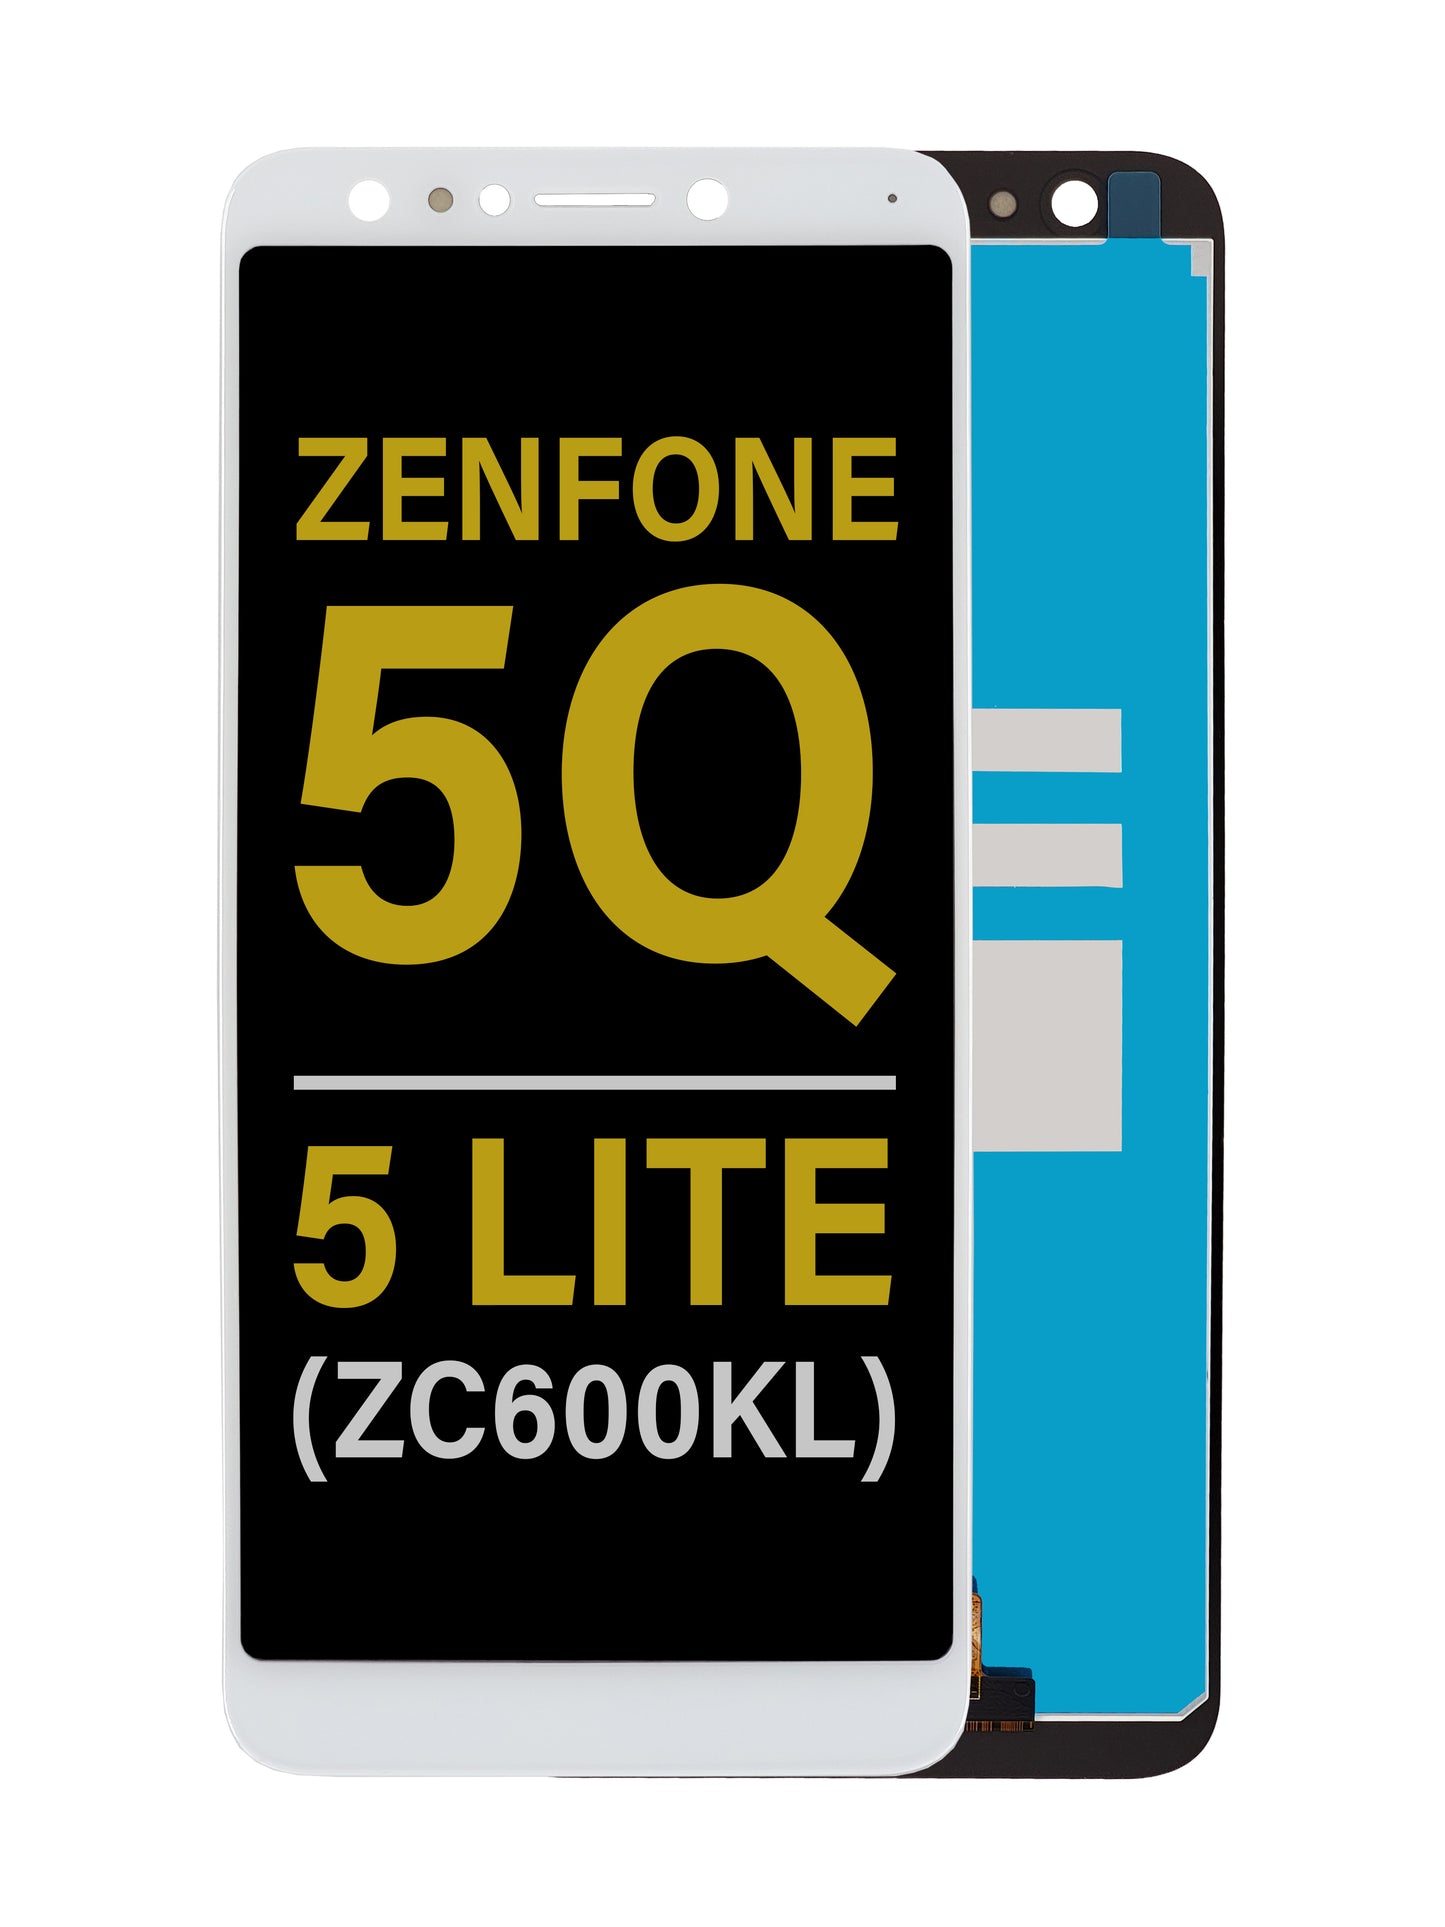 Zenfone 5Q / 5 Lite (ZC600KL) Screen Assembly (Without The Frame) (Refurbished) (White)